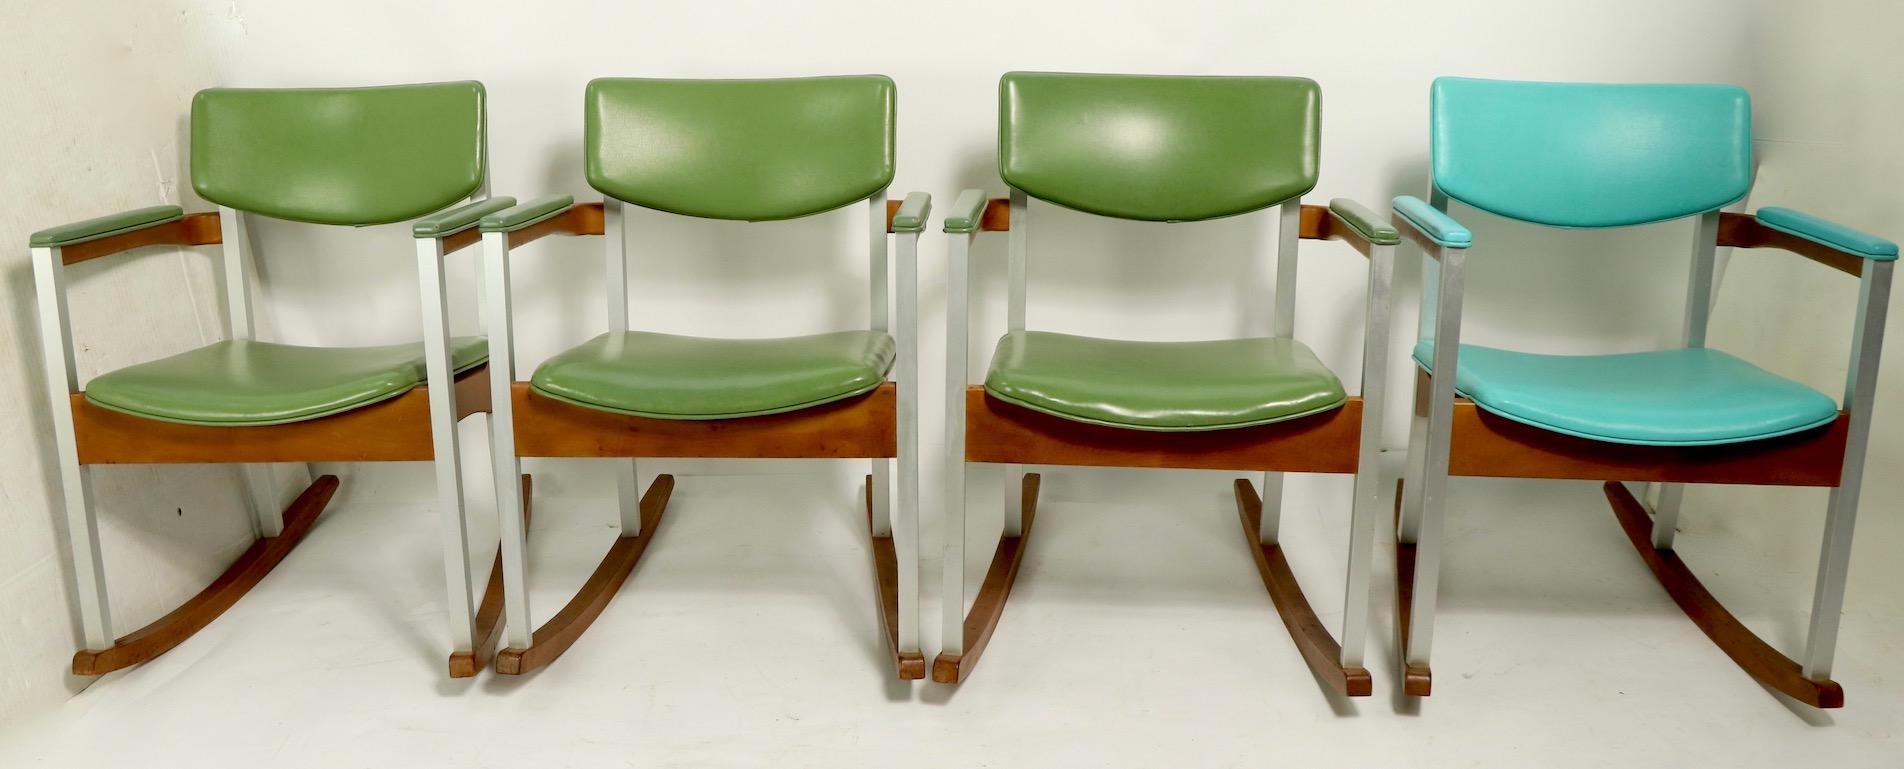 4 Mid Century Rocking Chairs by Thonet For Sale 11